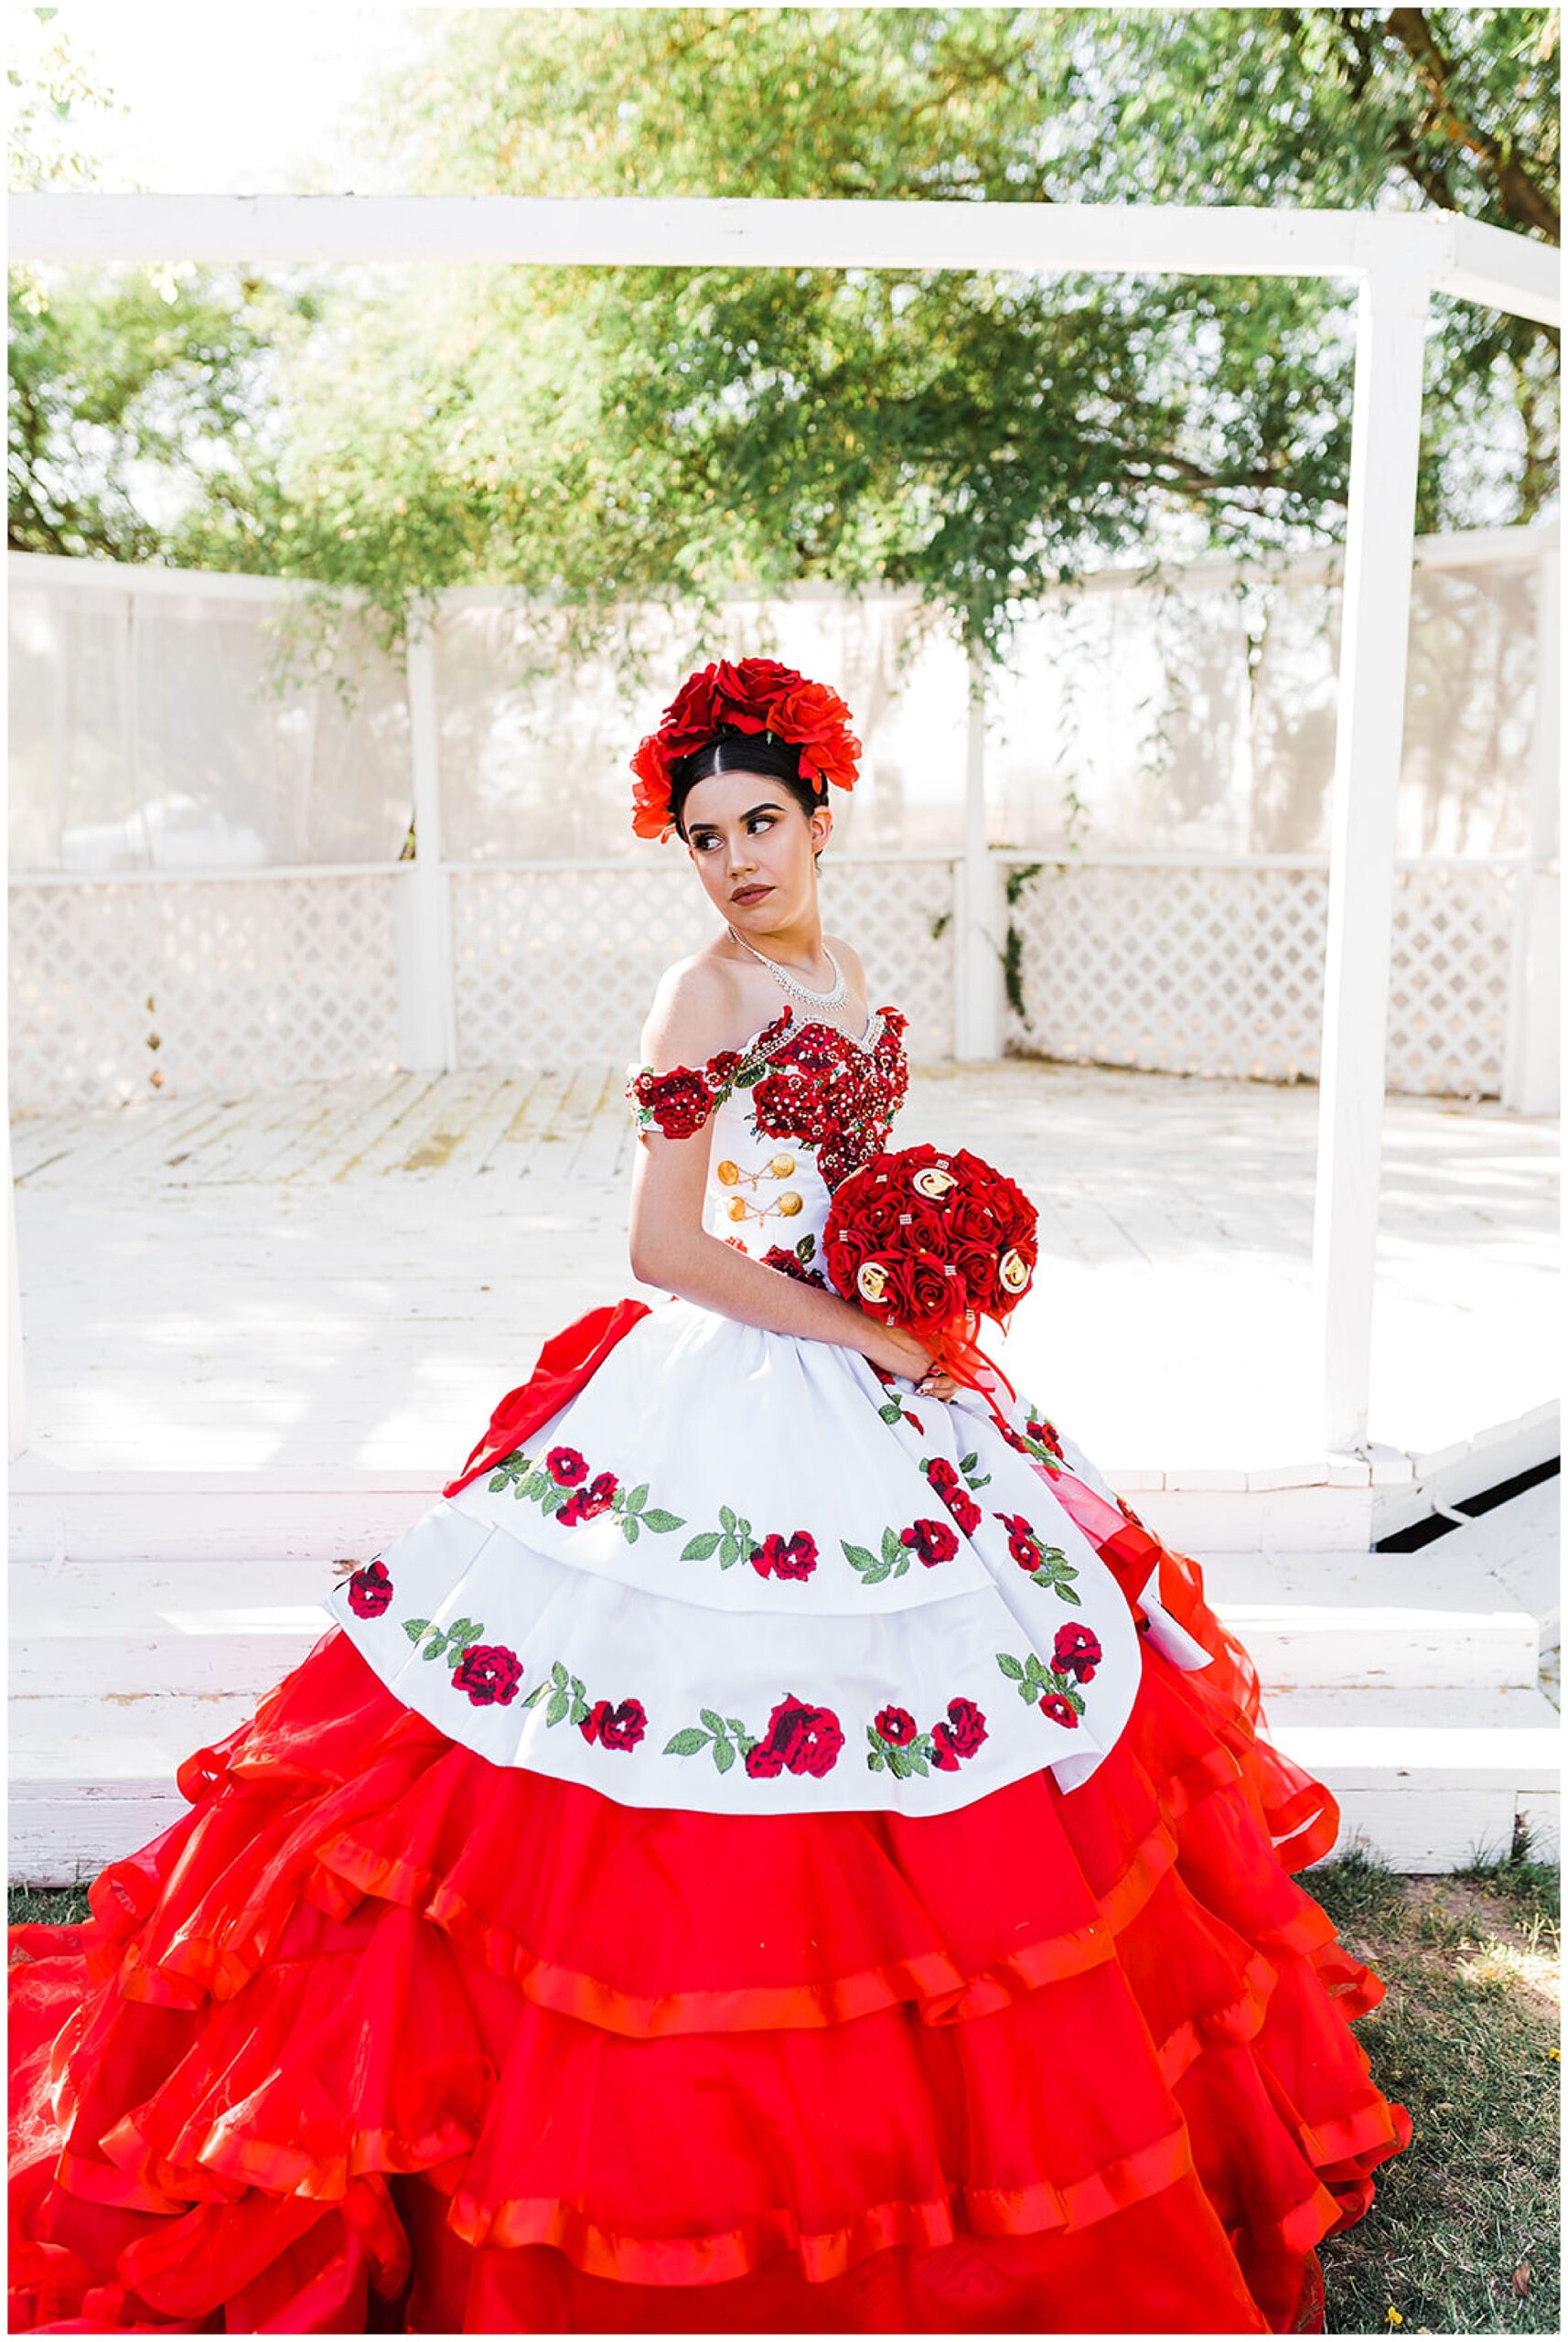 Teenager stands in a red and white ball gown embroidered with red roses while holding a red rose bouquet